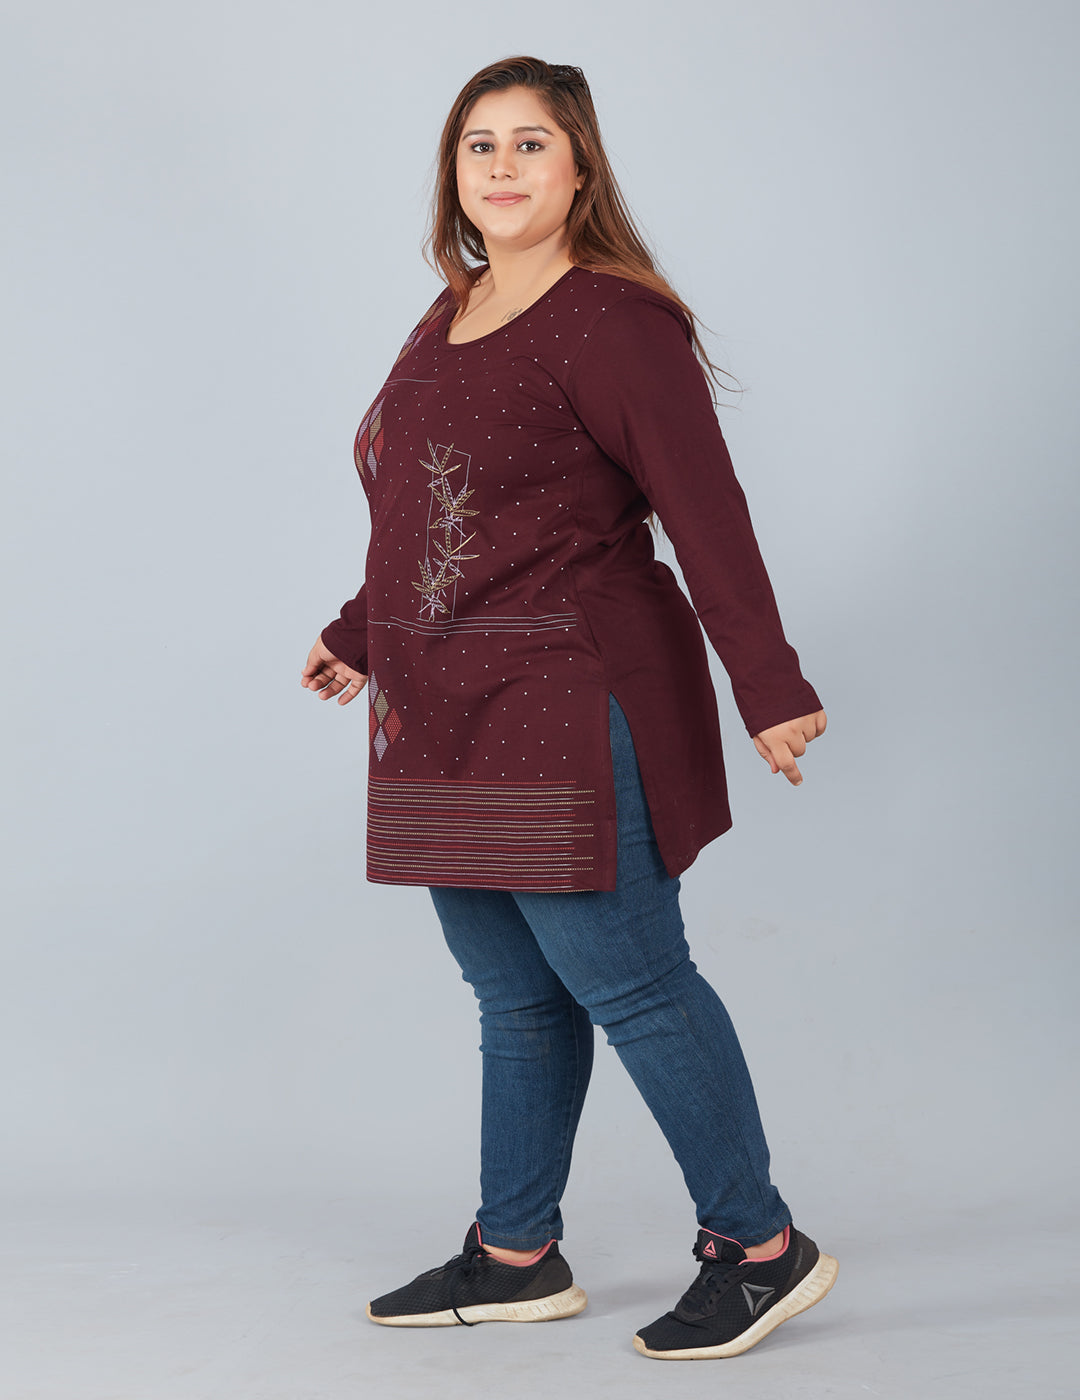 Cotton Long Top for Women Plus Size - Full Sleeve - Wine